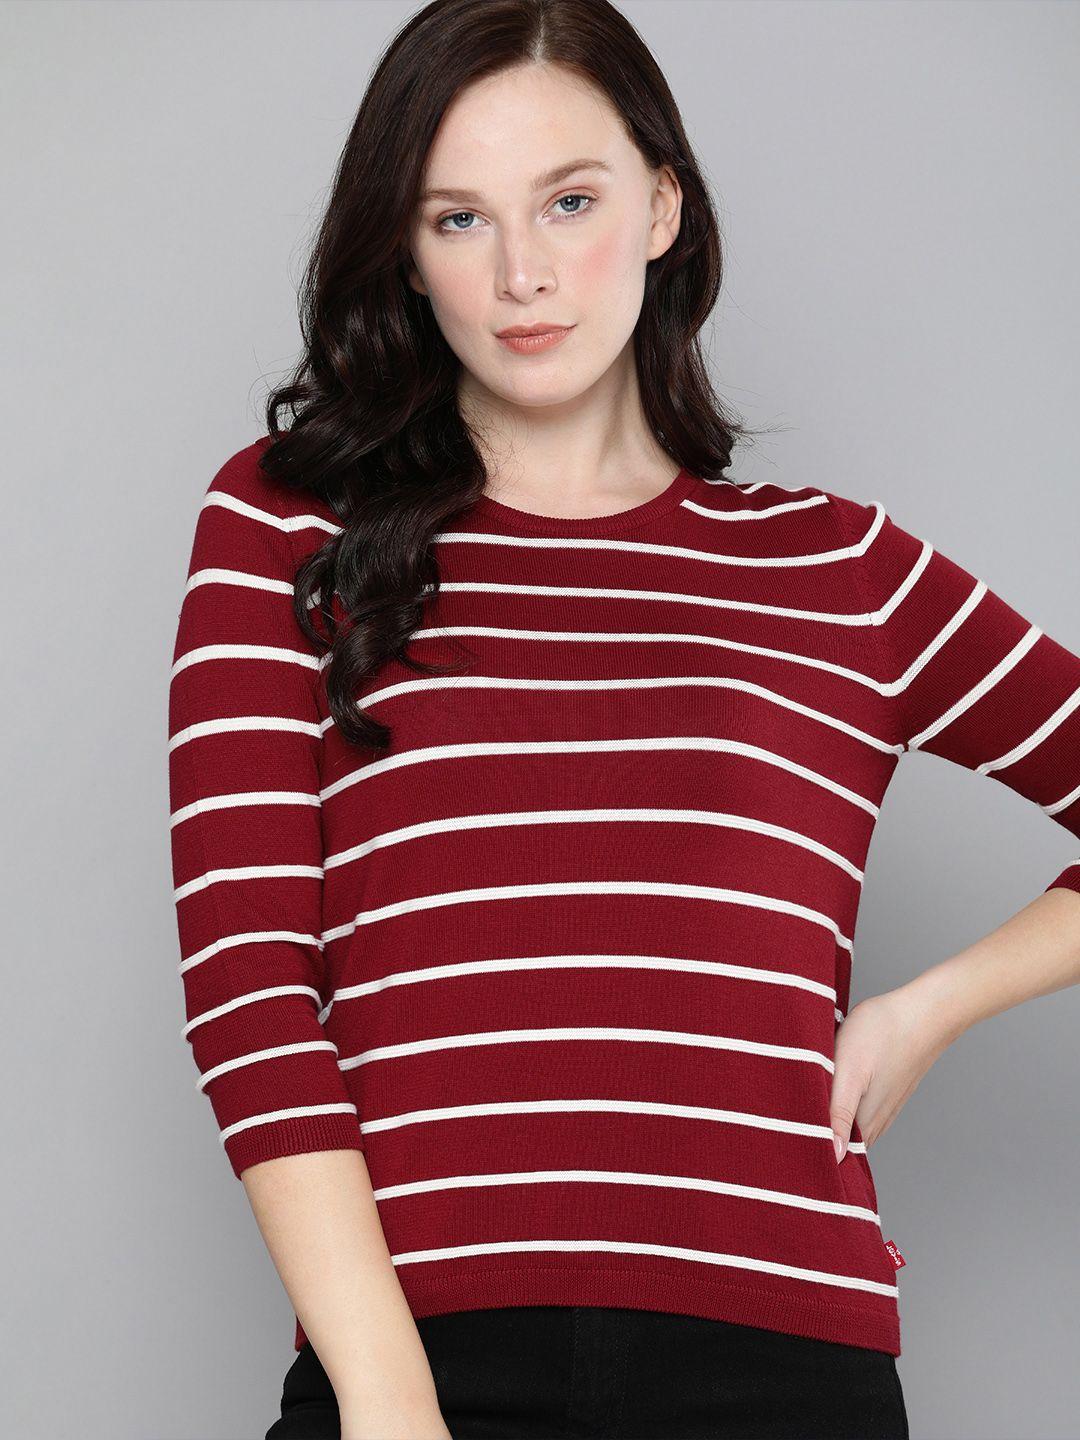 levis-women-maroon-&-white-striped-pullover-sweater